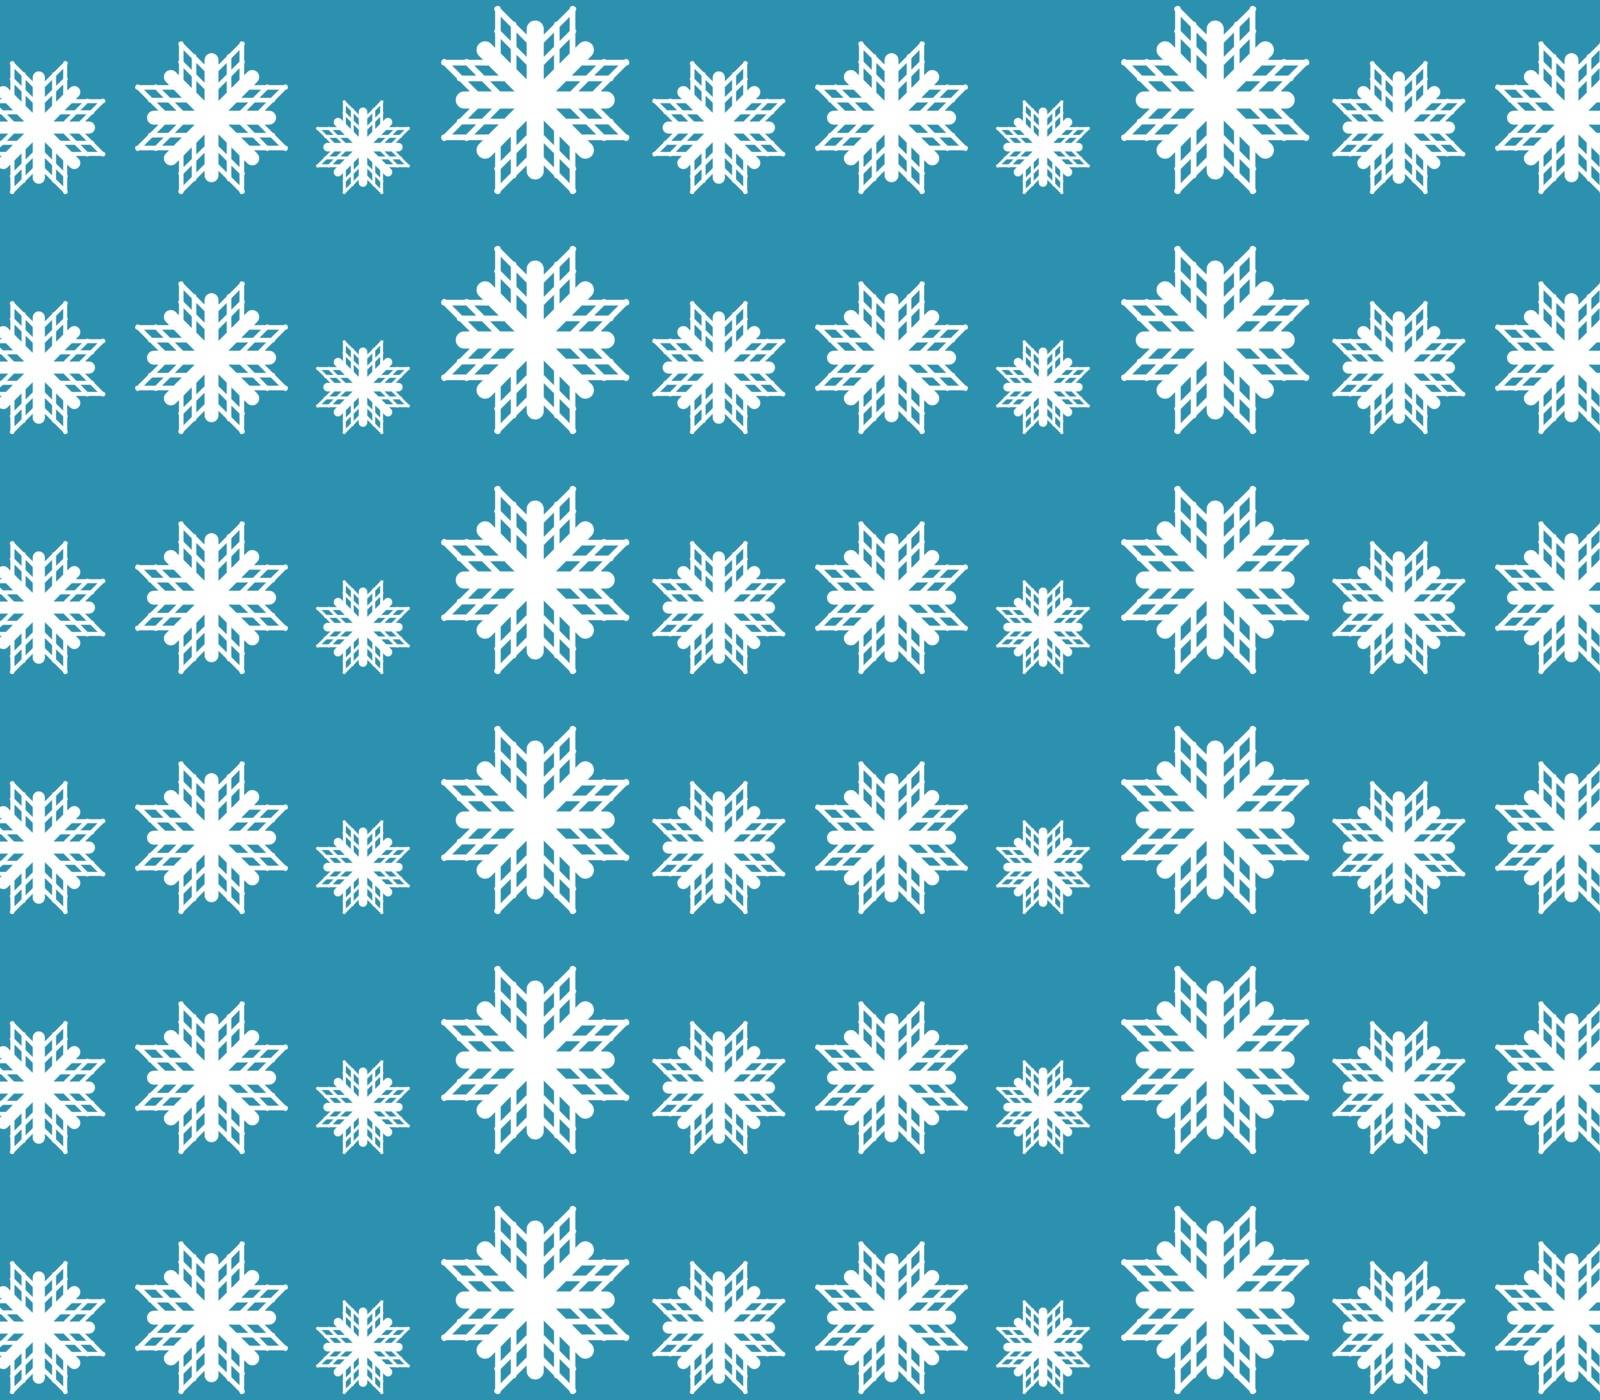 snow pattern by Mark1987